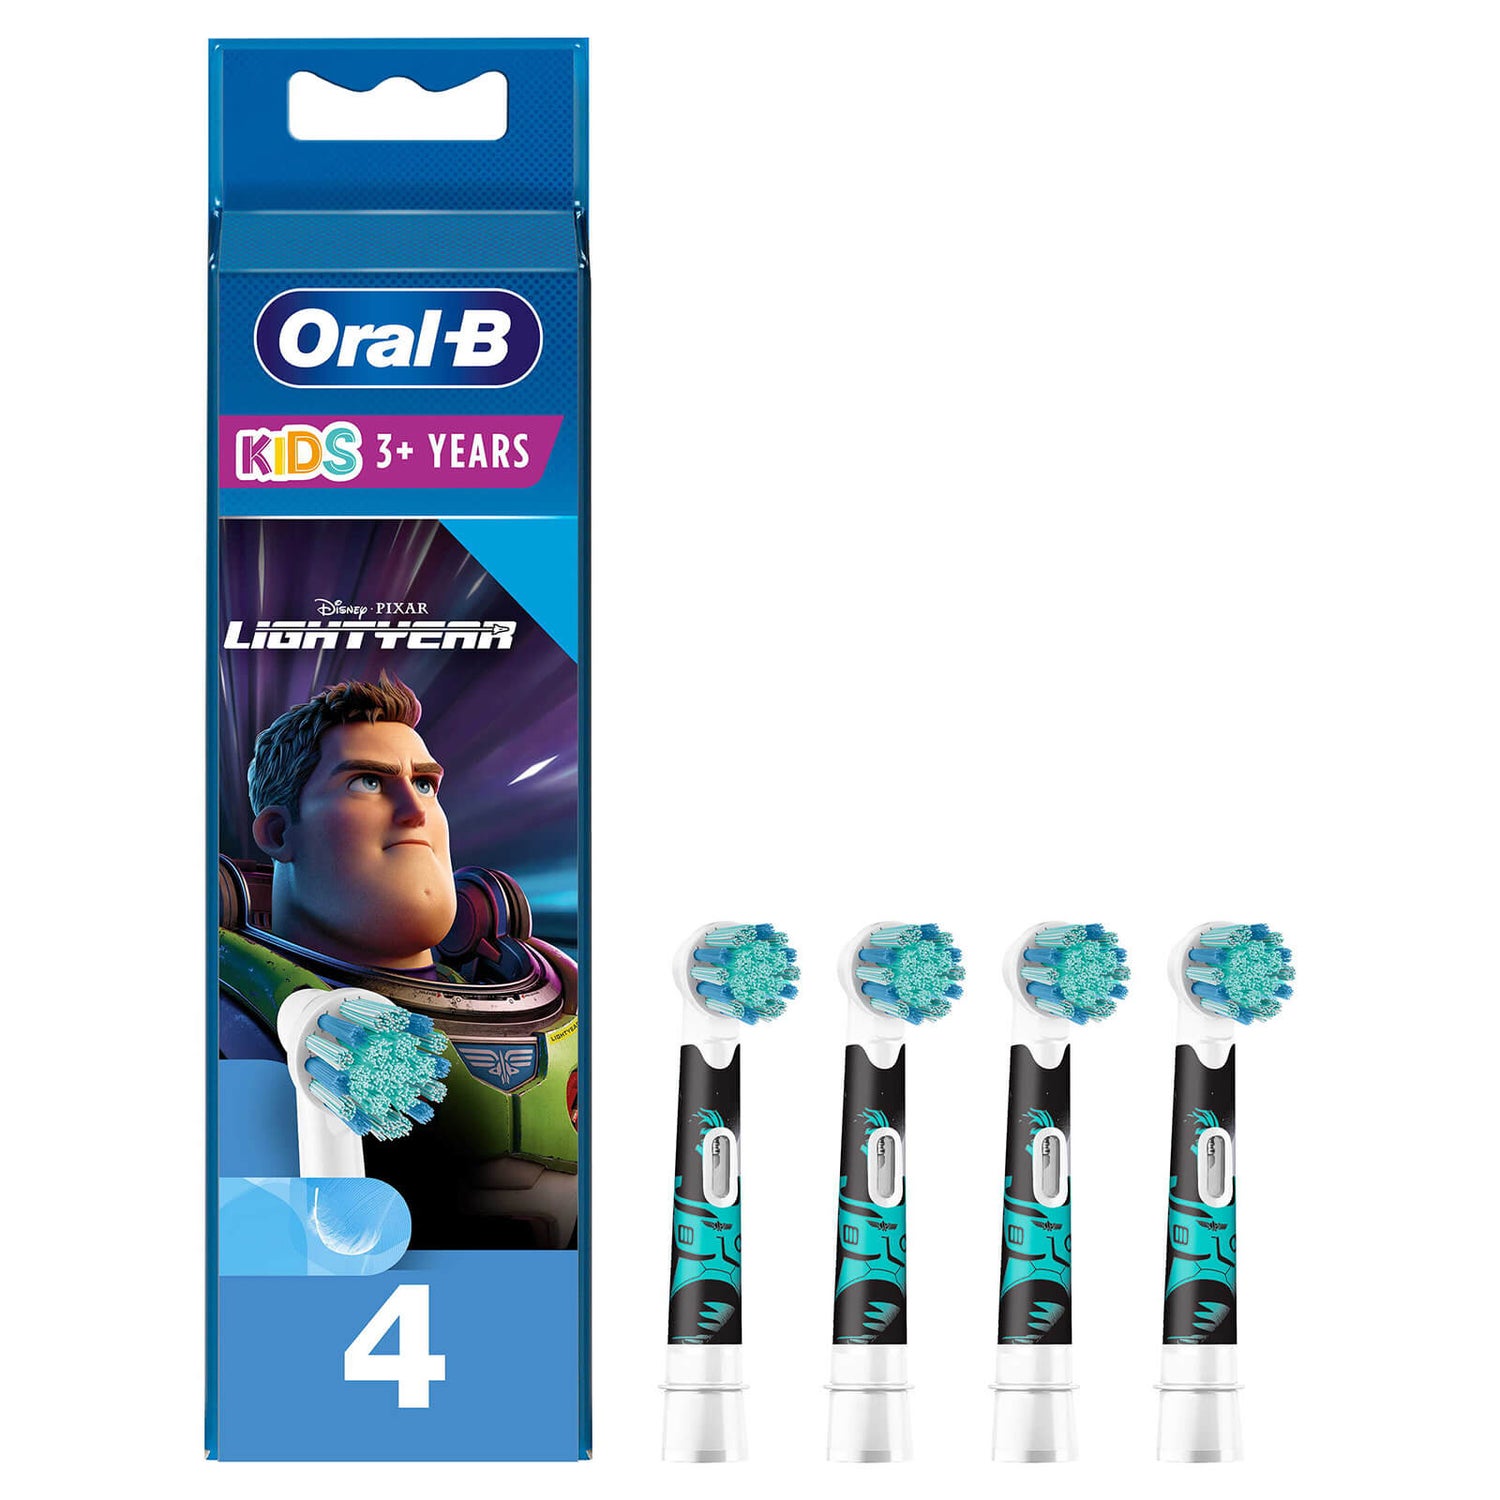 Oral-B Kids Disney Lightyear Electric Toothbrush Brush Heads, Pack of 4 Counts